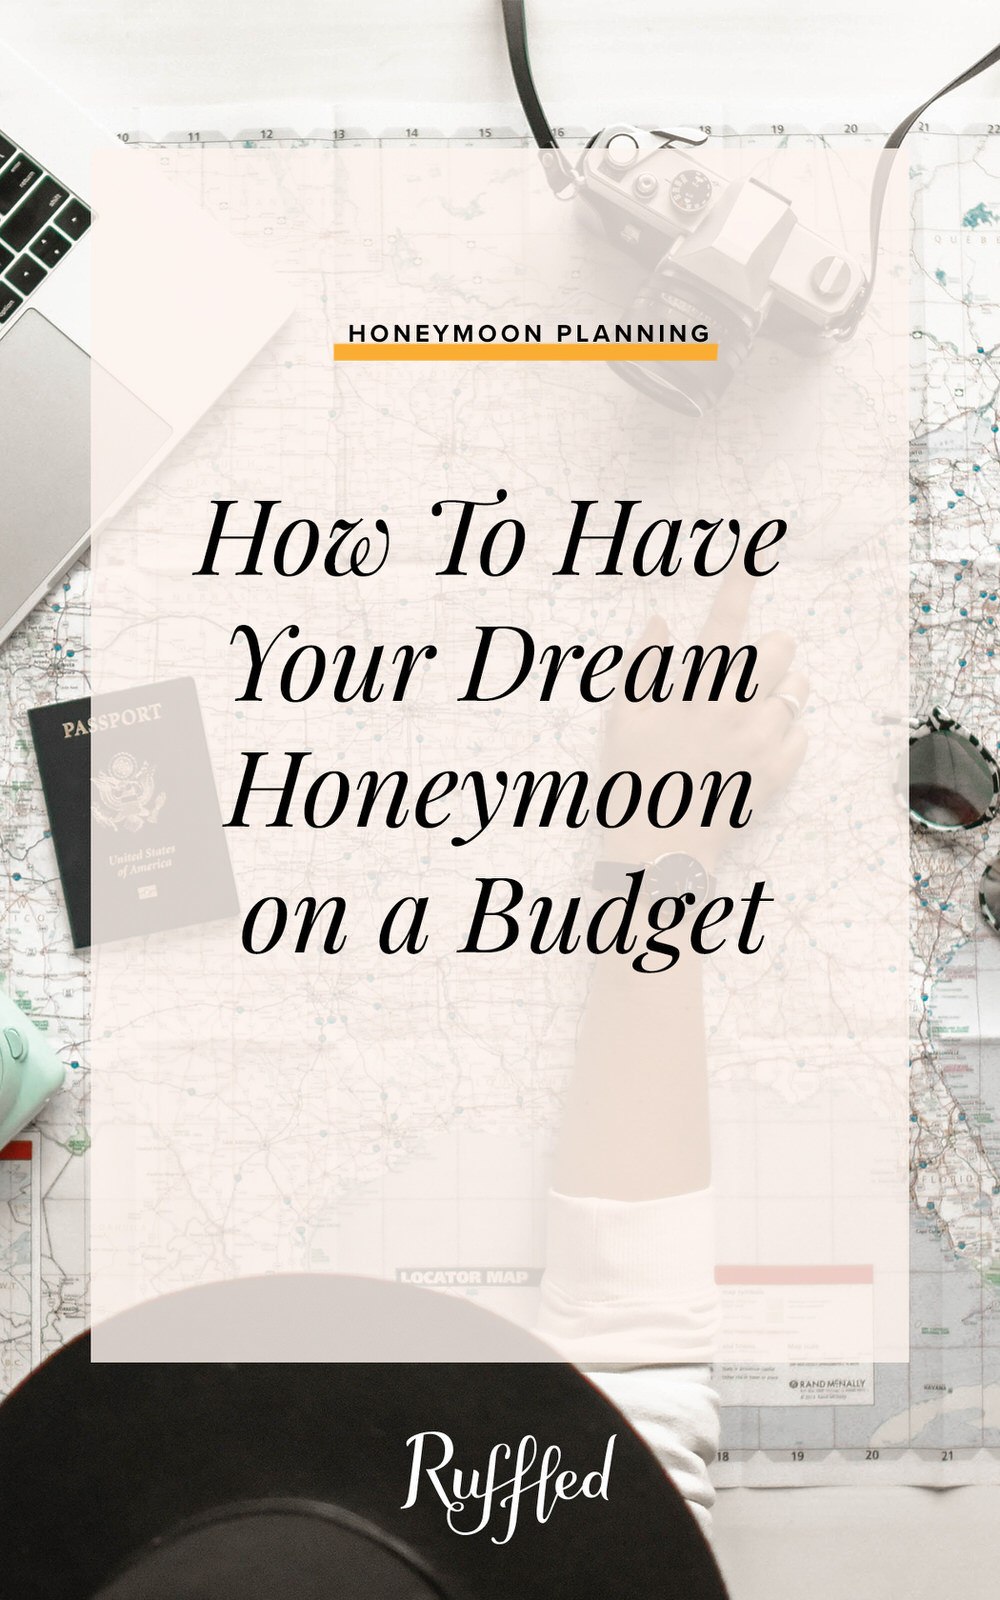 How to Have Your Dream Honeymoon on a Budget